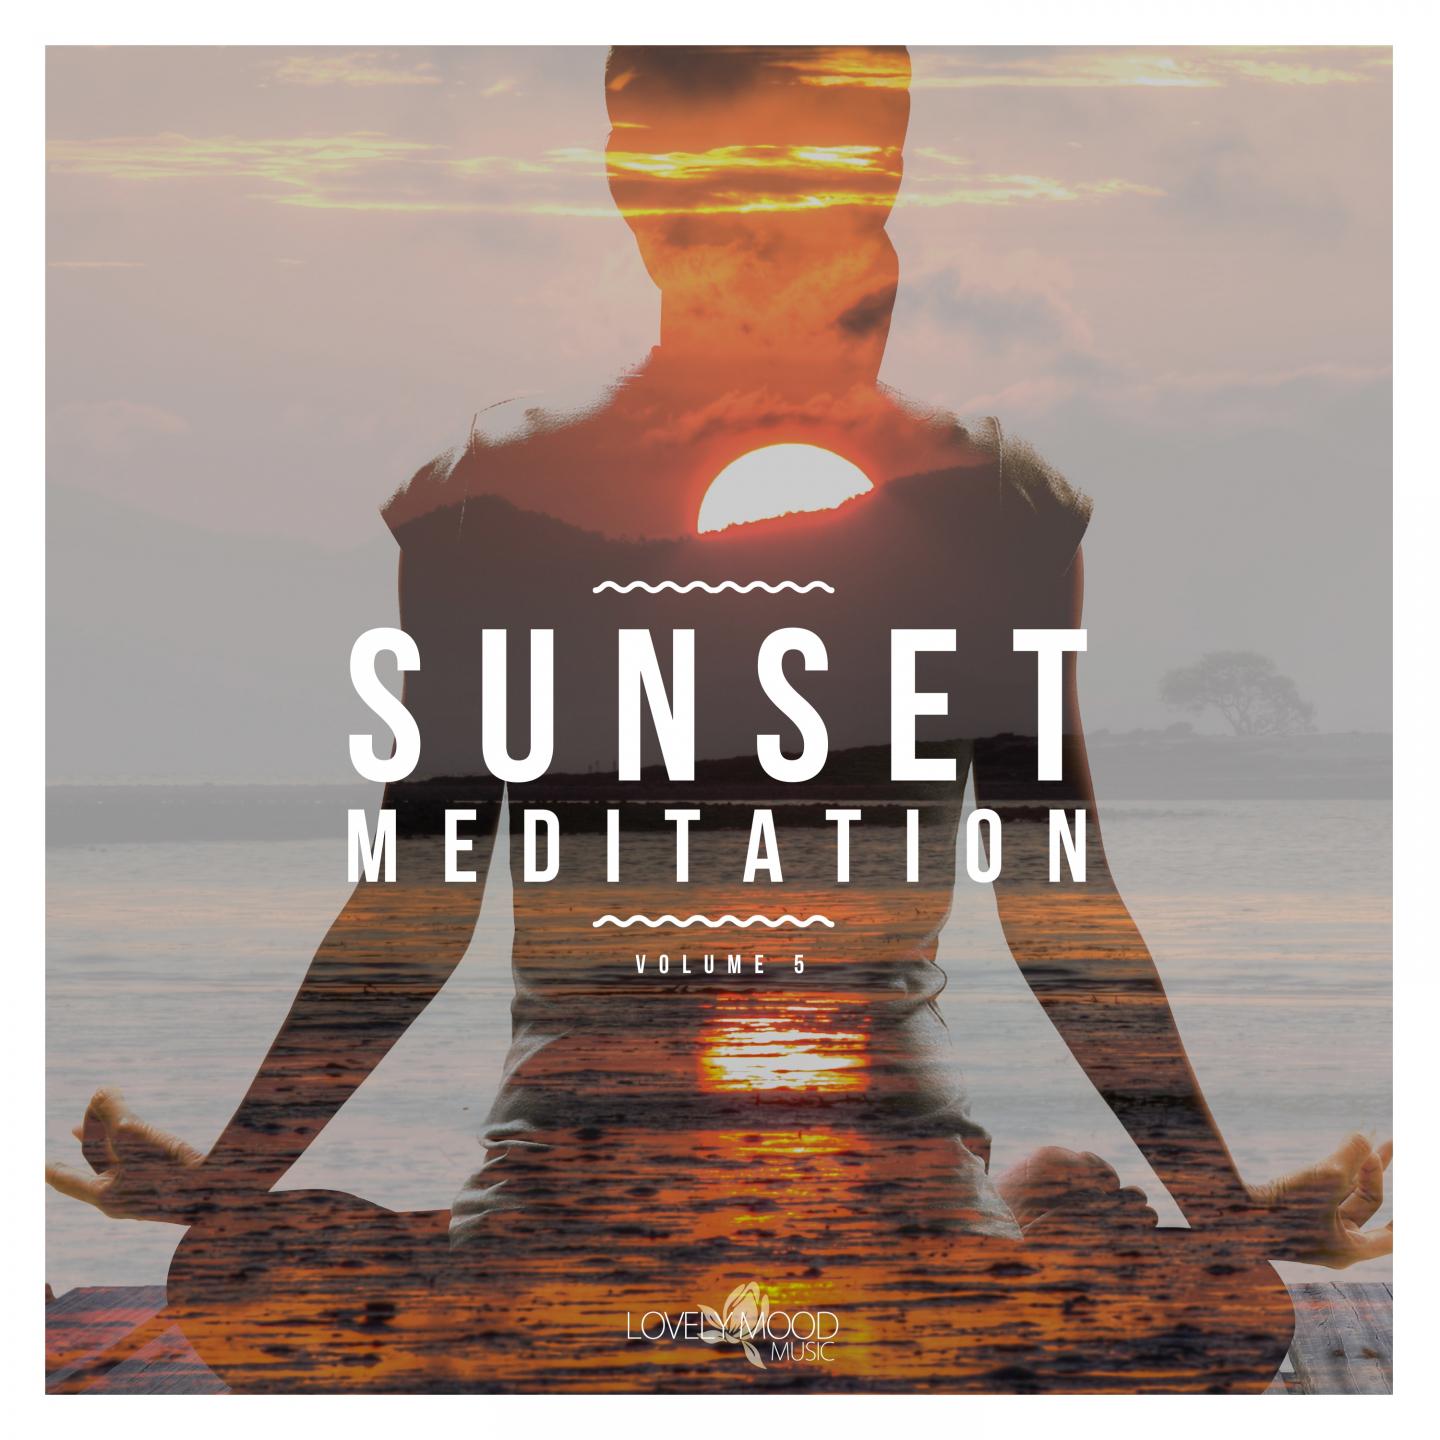 Sunset Meditation - Relaxing Chill Out Music, Vol. 5